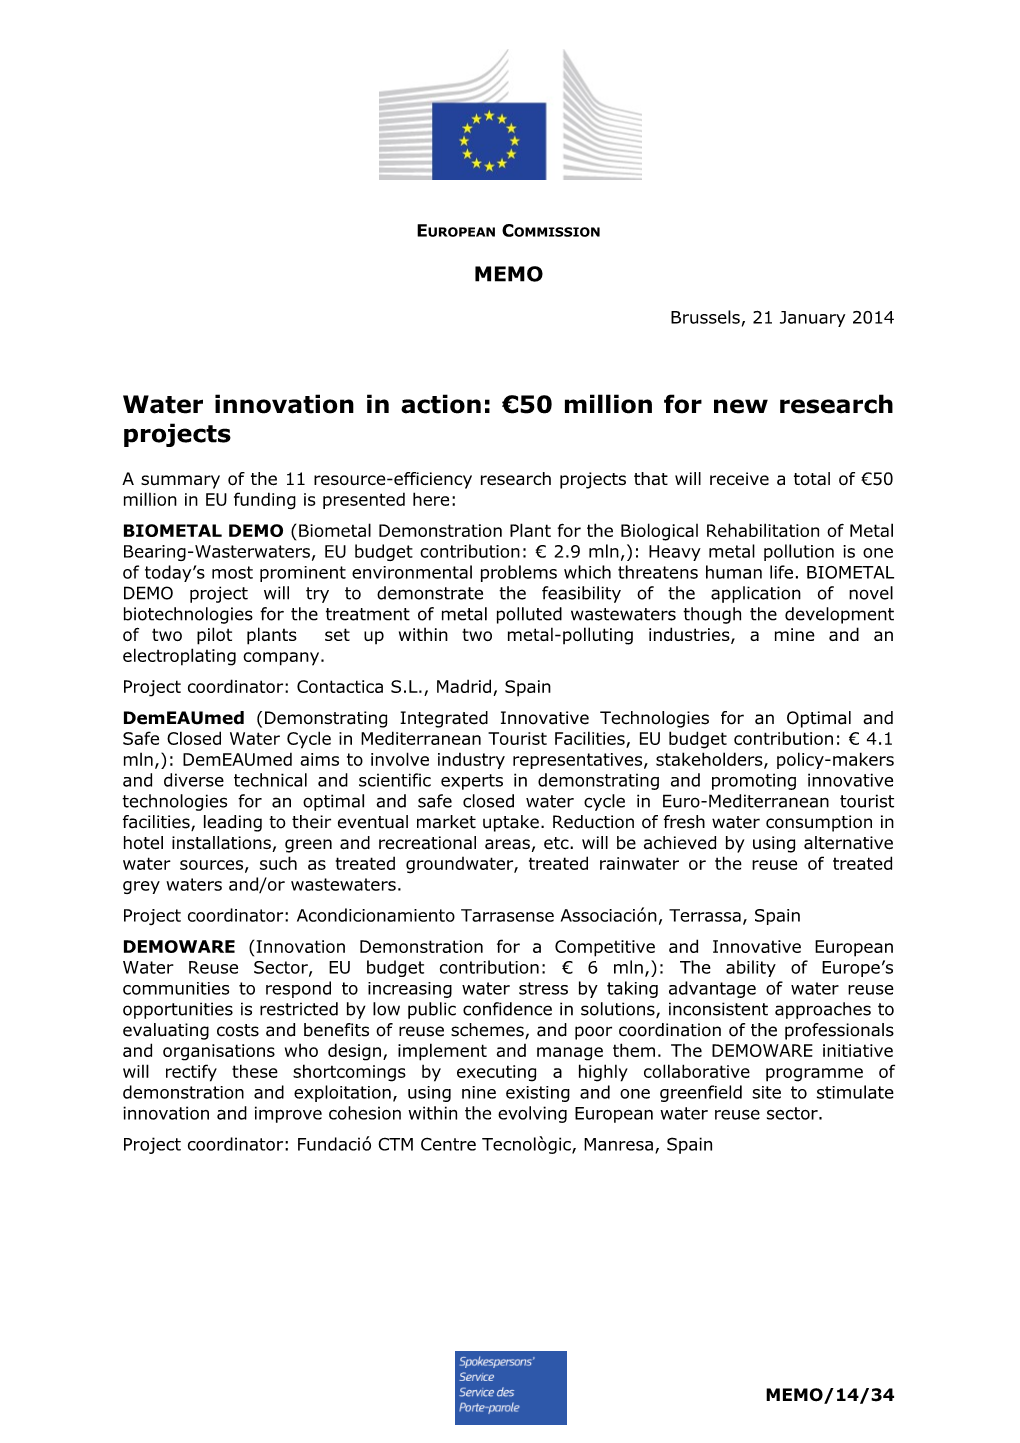 Water Innovation in Action: 50 Million for New Research Projects